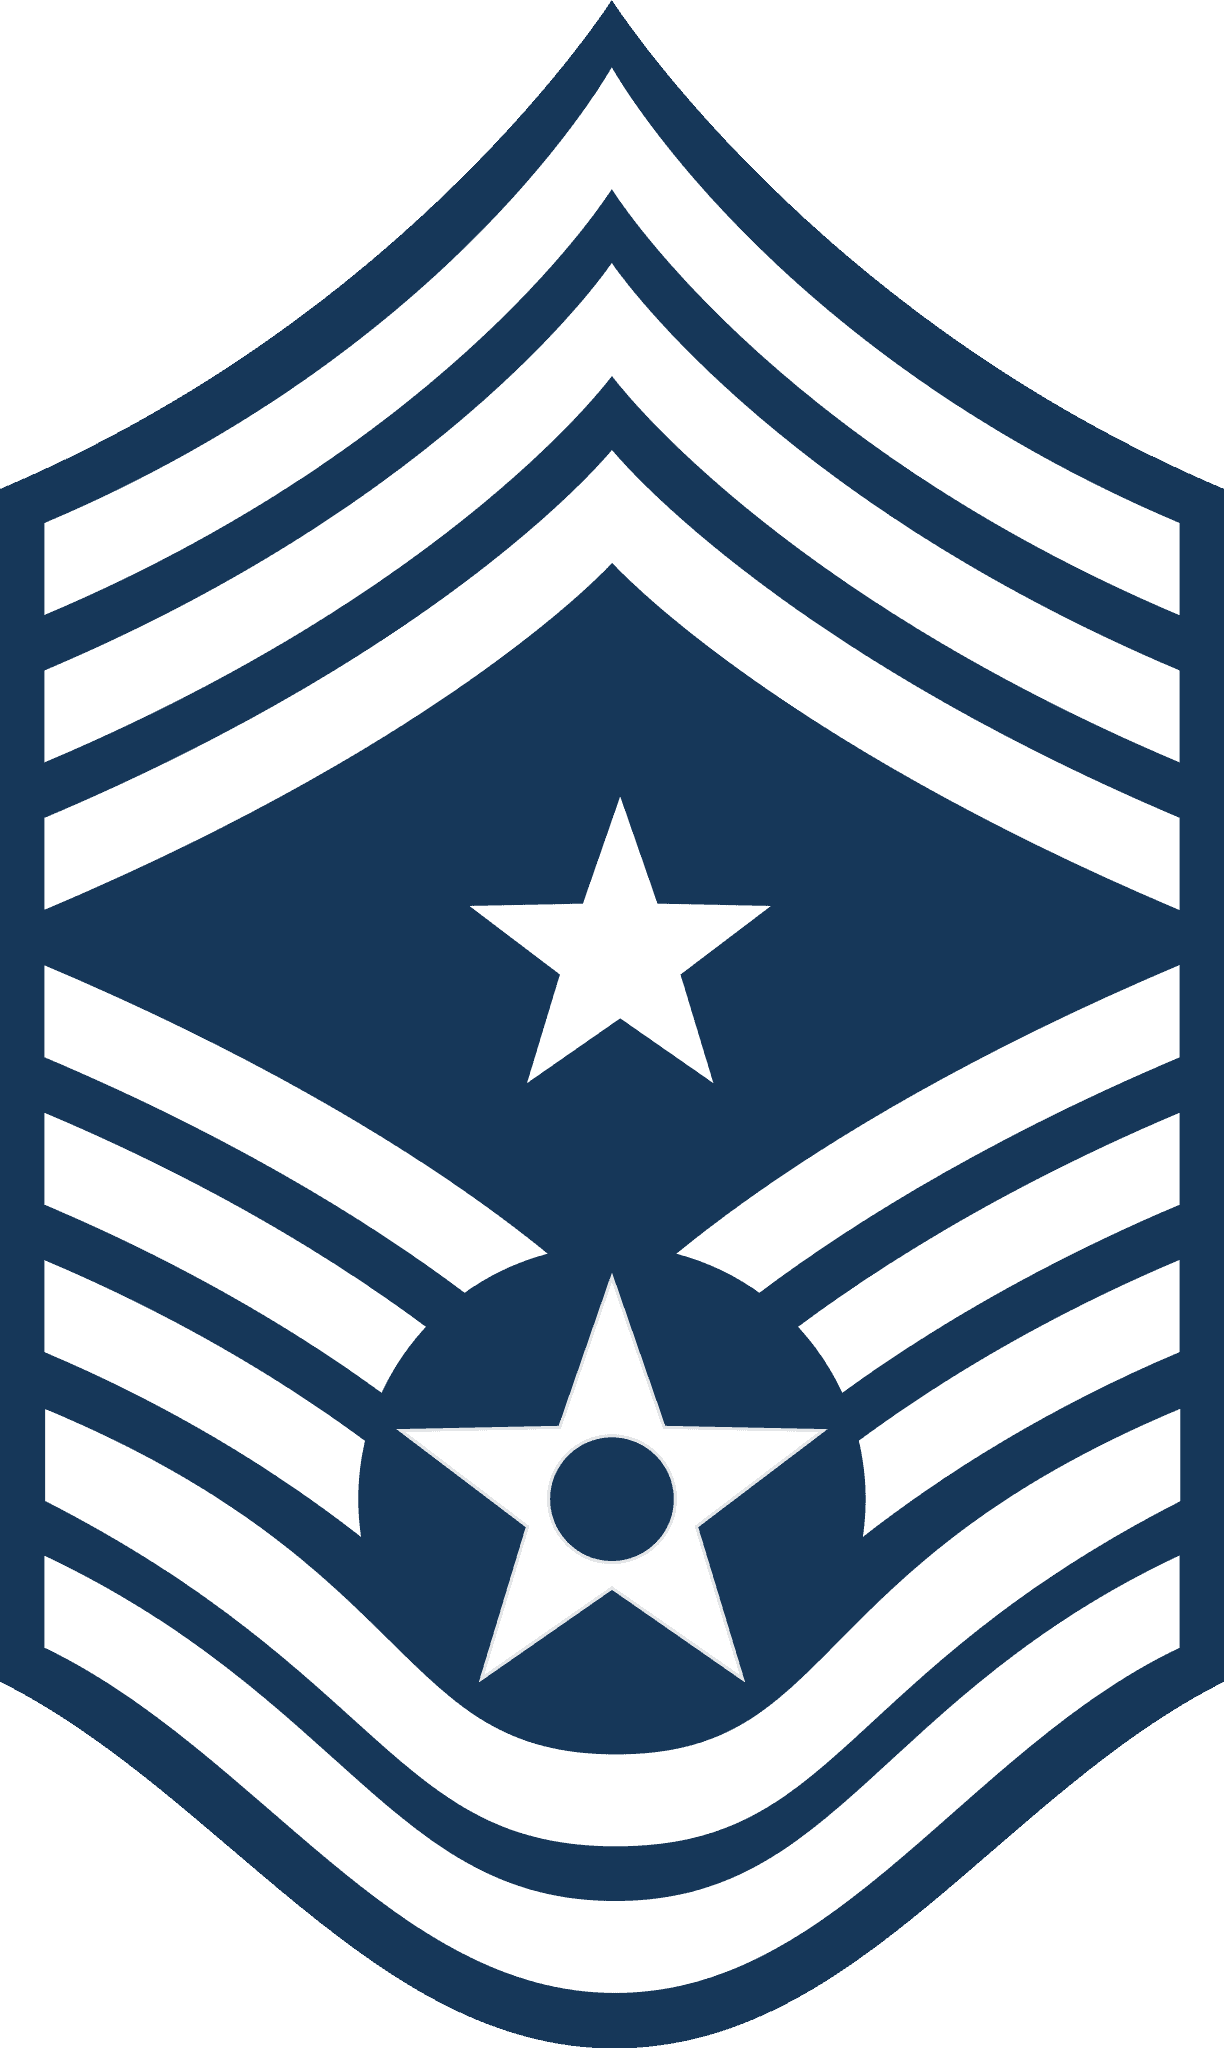 <p>The E-9 rank can be one of three roles with the Chief Master Sergeant, Command Chief Master Sergeant, and Chief Master Sergeant of the Air Force. It is the highest enlisted rank in the service. Annual base pay is $76,446 and $118,696. </p><p><span>Would you please let us know what you think about our content? <p>Agree? Tell us by clicking the “Thumbs Up” button above.</p> Disagree? Leave a comment telling us what you’d change.</span></p>